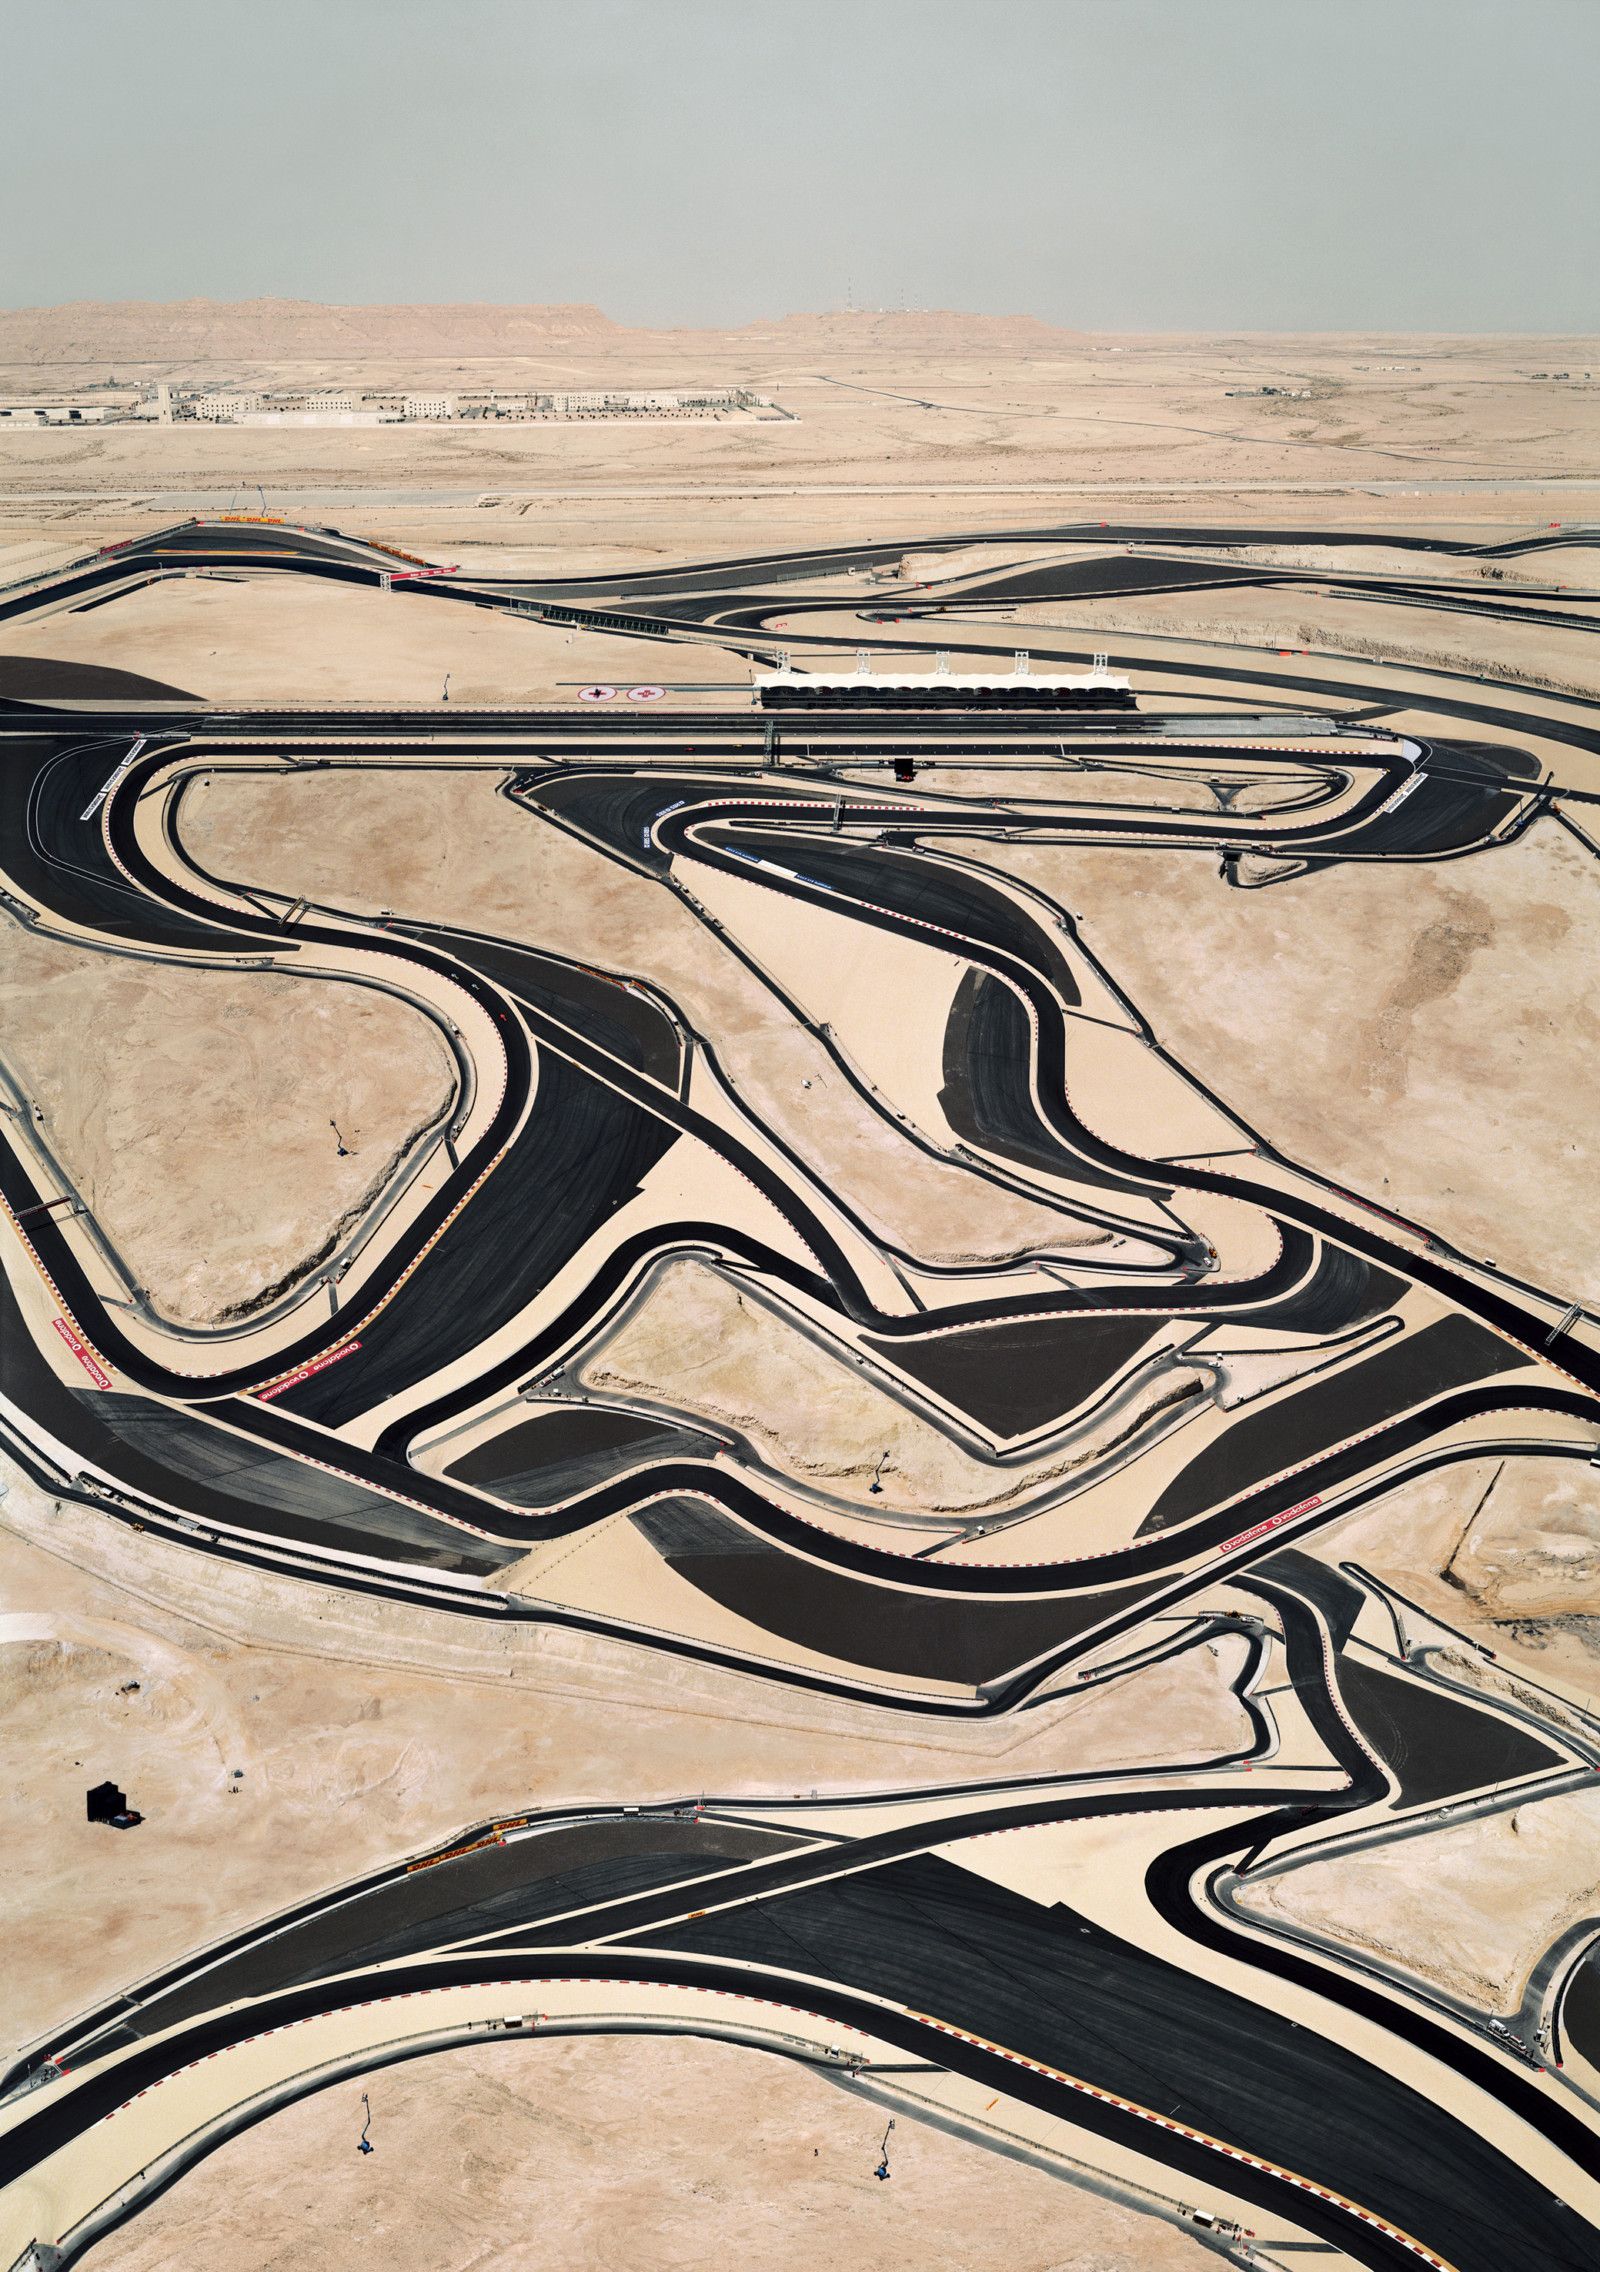 Andreas Gursky from 1980 to present - His best photos